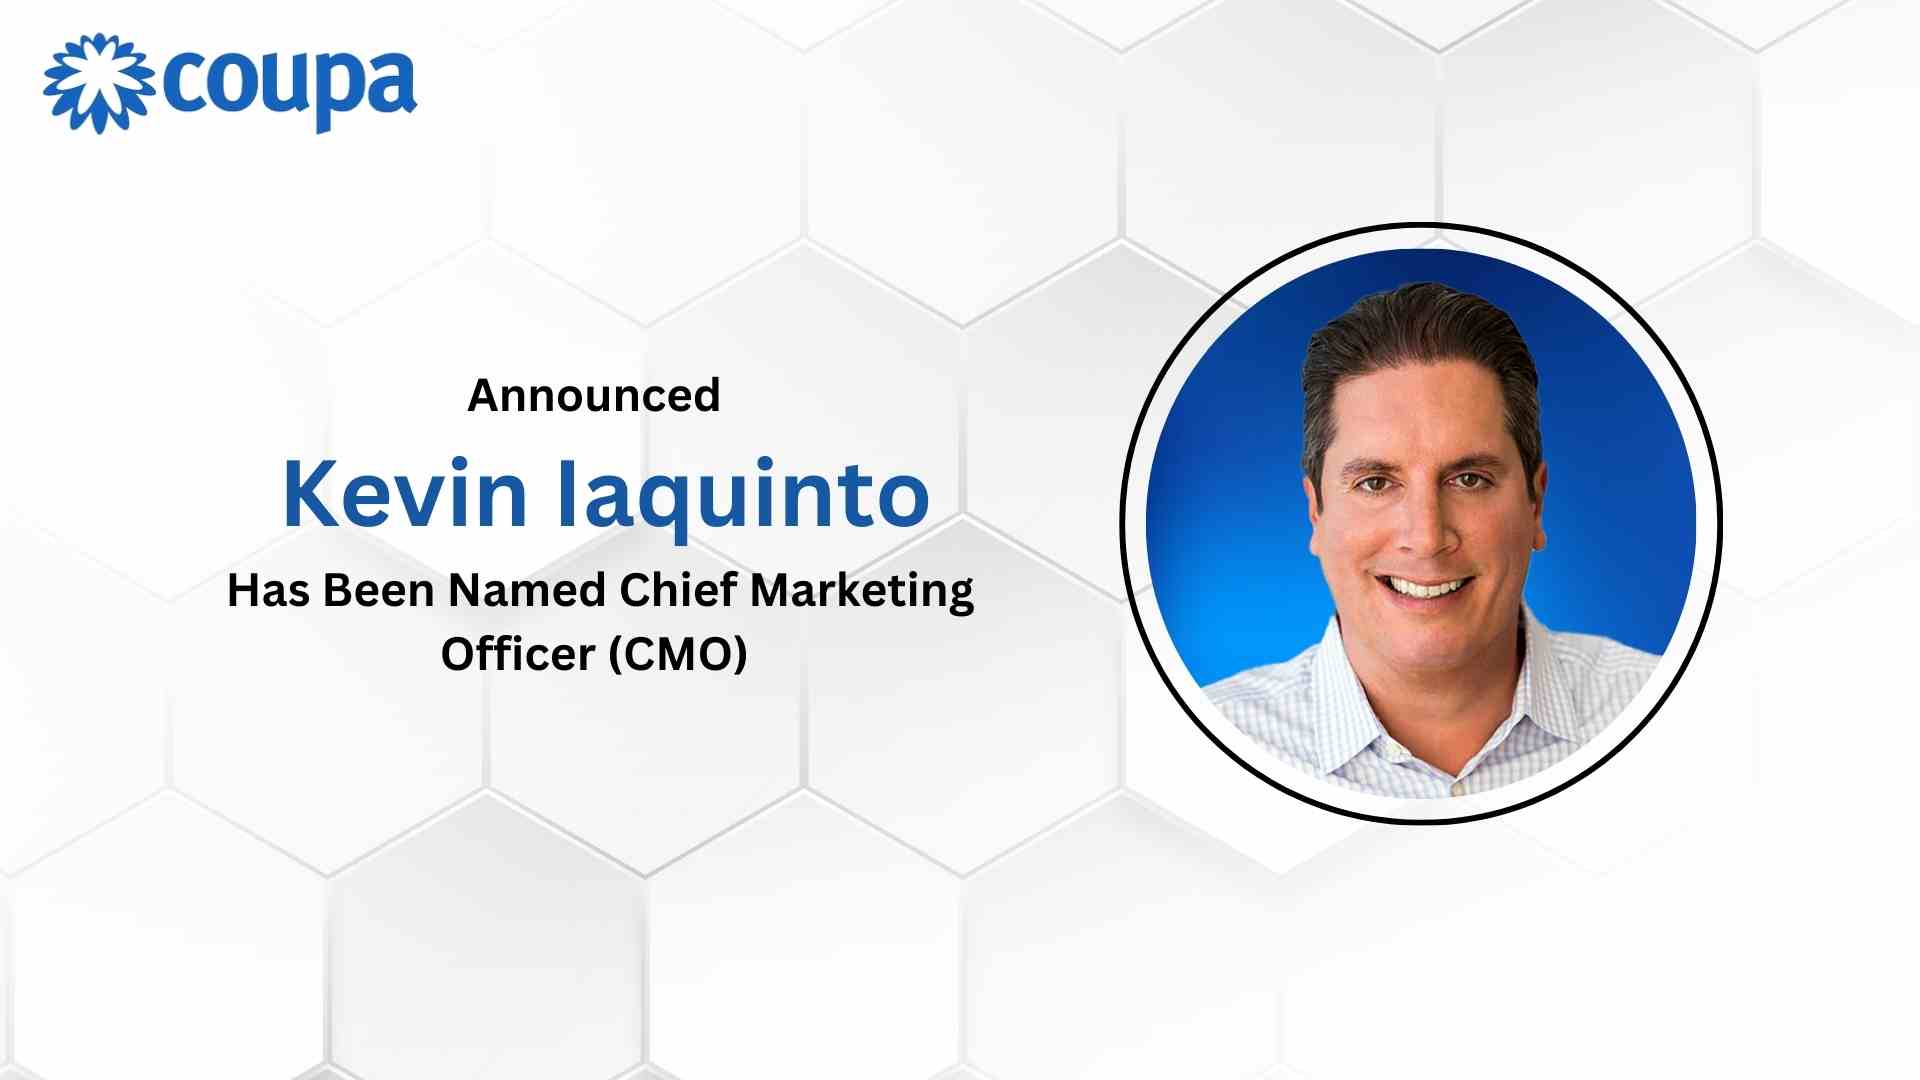 Coupa Welcomes Kevin Iaquinto as Chief Marketing Officer